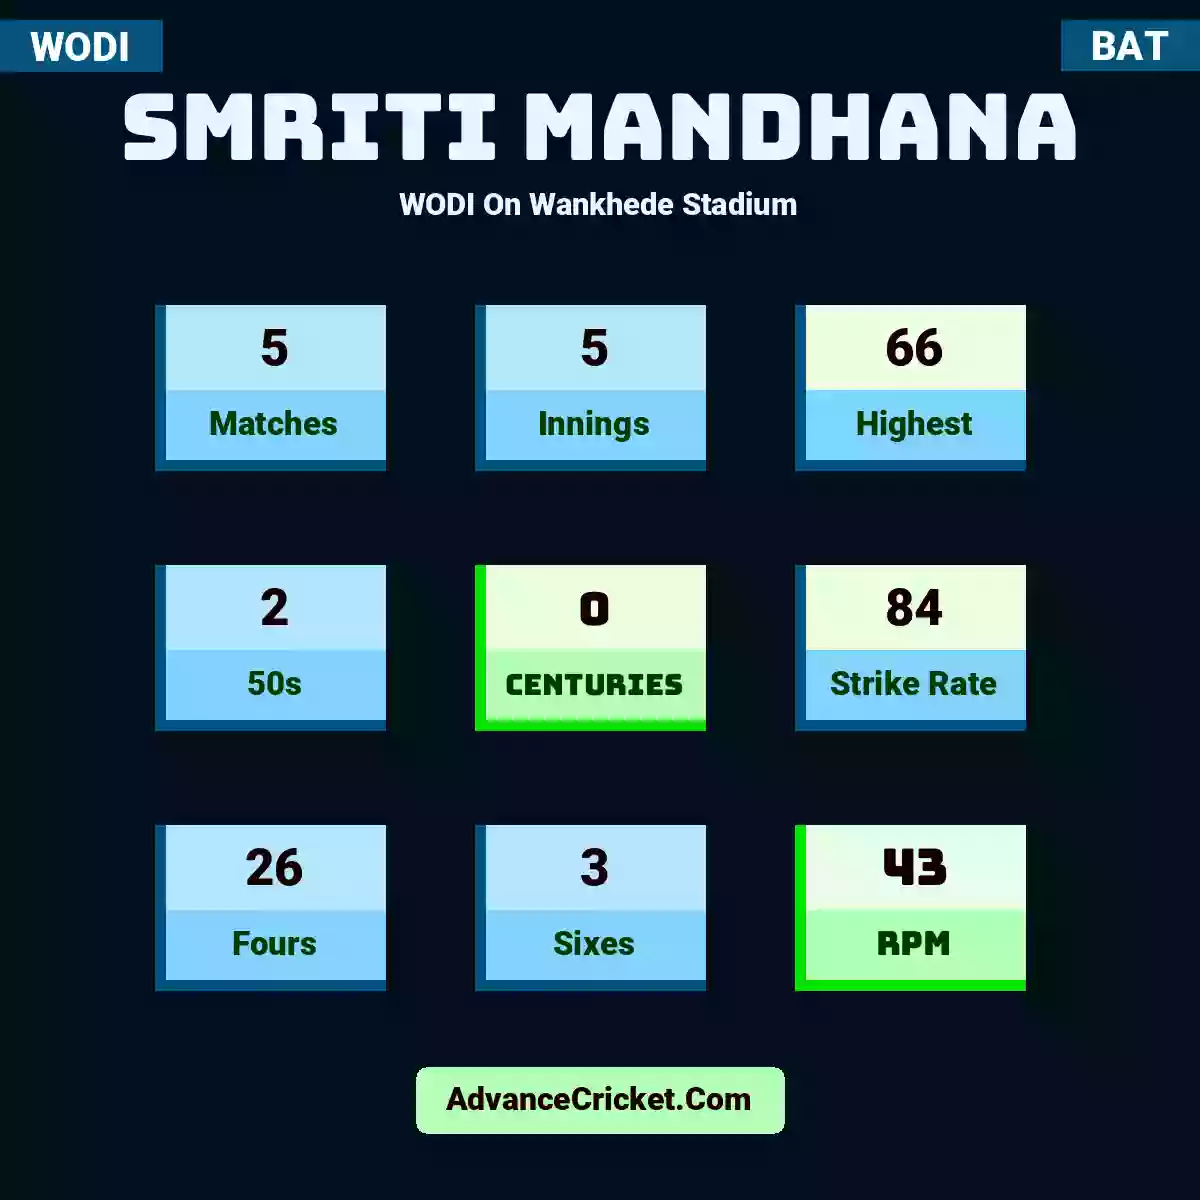 Smriti Mandhana WODI  On Wankhede Stadium, Smriti Mandhana played 5 matches, scored 66 runs as highest, 2 half-centuries, and 0 centuries, with a strike rate of 84. S.Mandhana hit 26 fours and 3 sixes, with an RPM of 43.